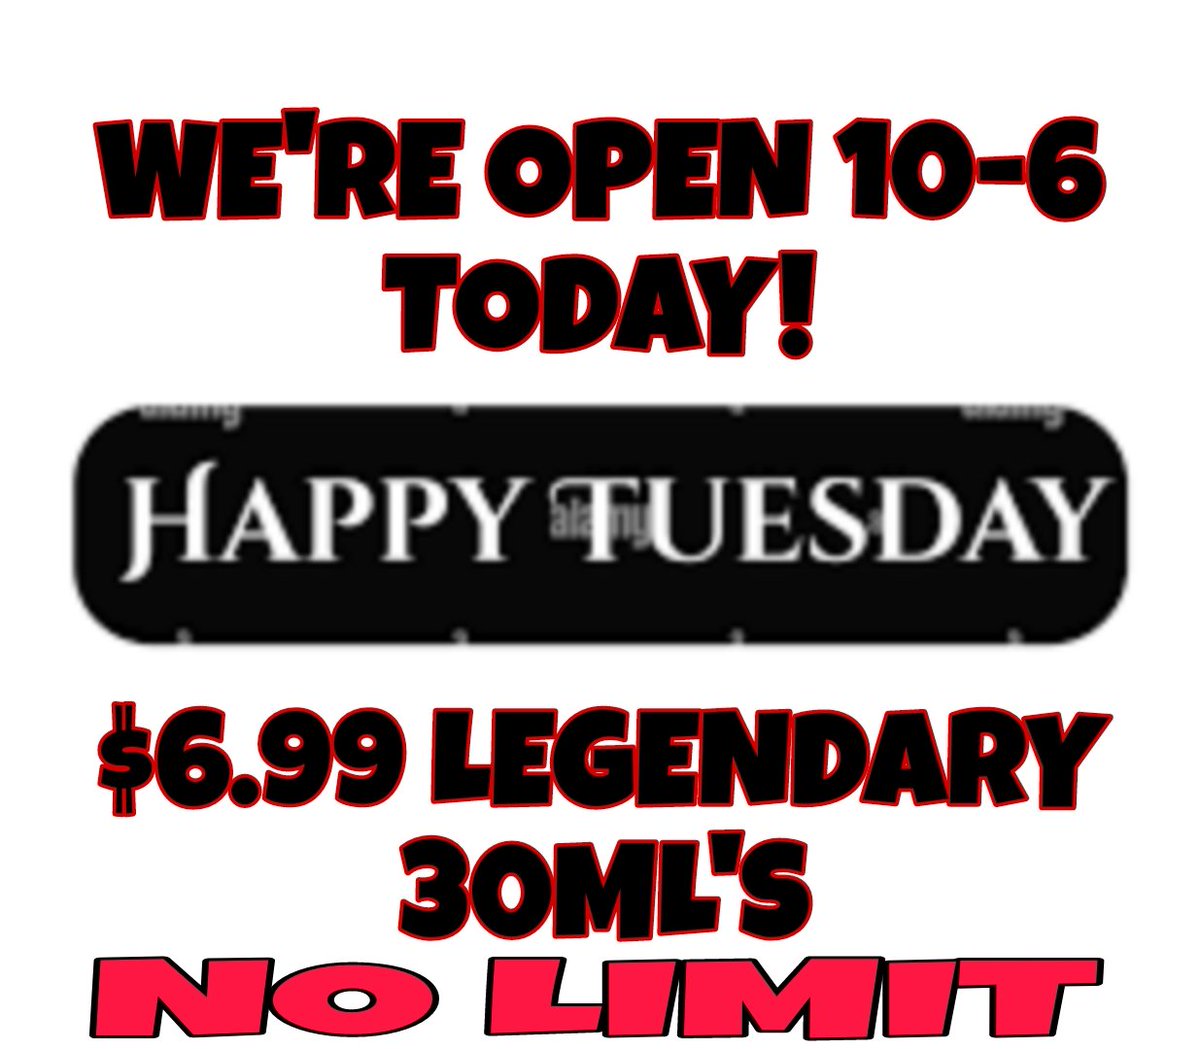 HAPPY TUESDAY!  #Legendary #Deals #stockup #sale #smok #geekvape #sebring #florida #nolimit #saltnic #disposables #supportlocal #ShopLocal #momandpopshop #WeGotWhatYouNeed #Czar #Raz #lostmary #HQD #Orion #NoLimit and more BEST PRICES IN TOWN!